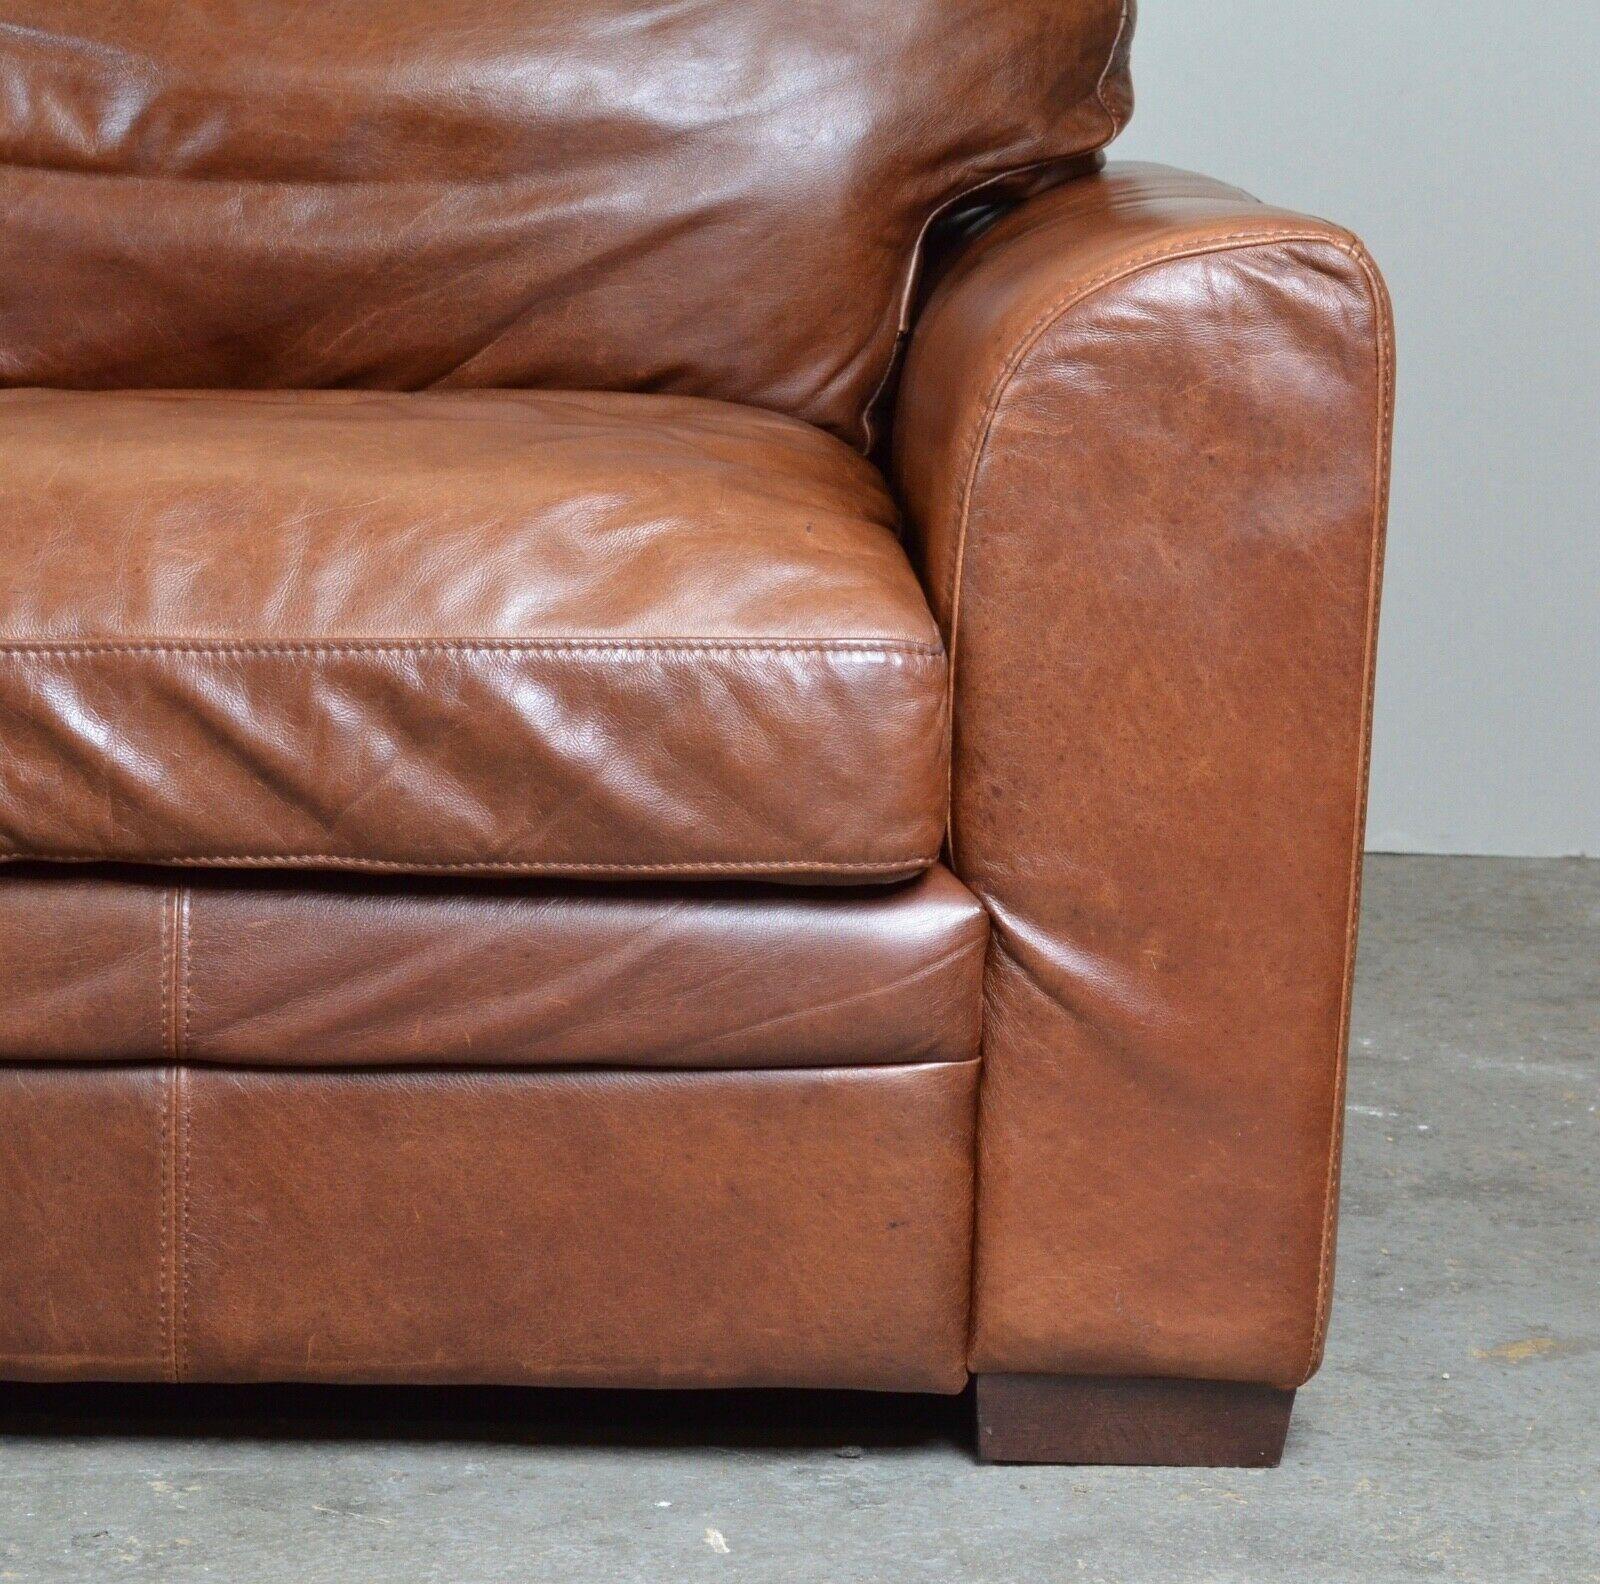 Leather LUXURY VIVA ITALIAN DESIGNER TAN LEATHER 3 SEATER SOFA ARMCHAiR  ALSO AVAILABLE For Sale